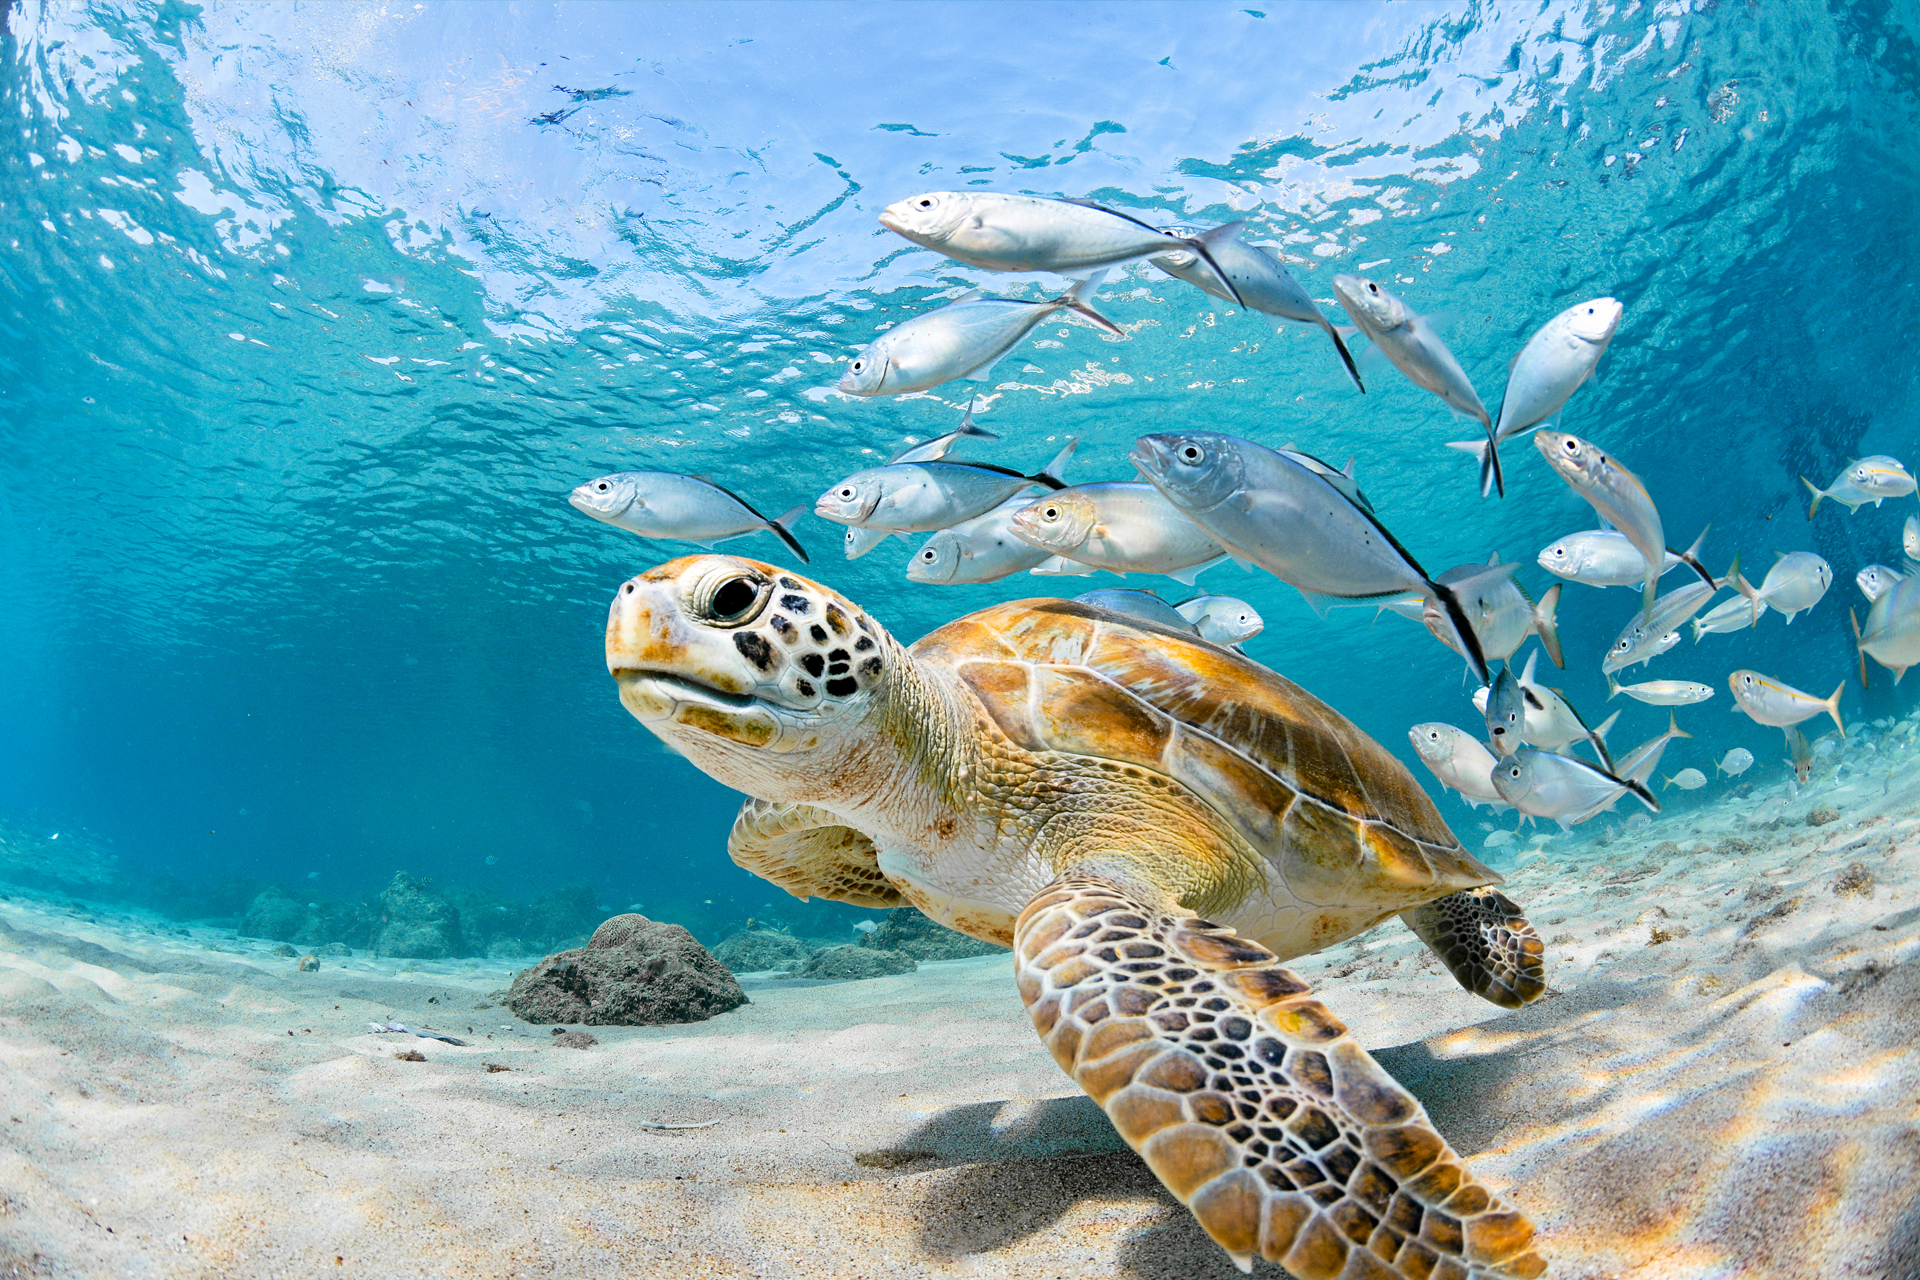 TIME for Kids | Kids Care About: Sea Turtles